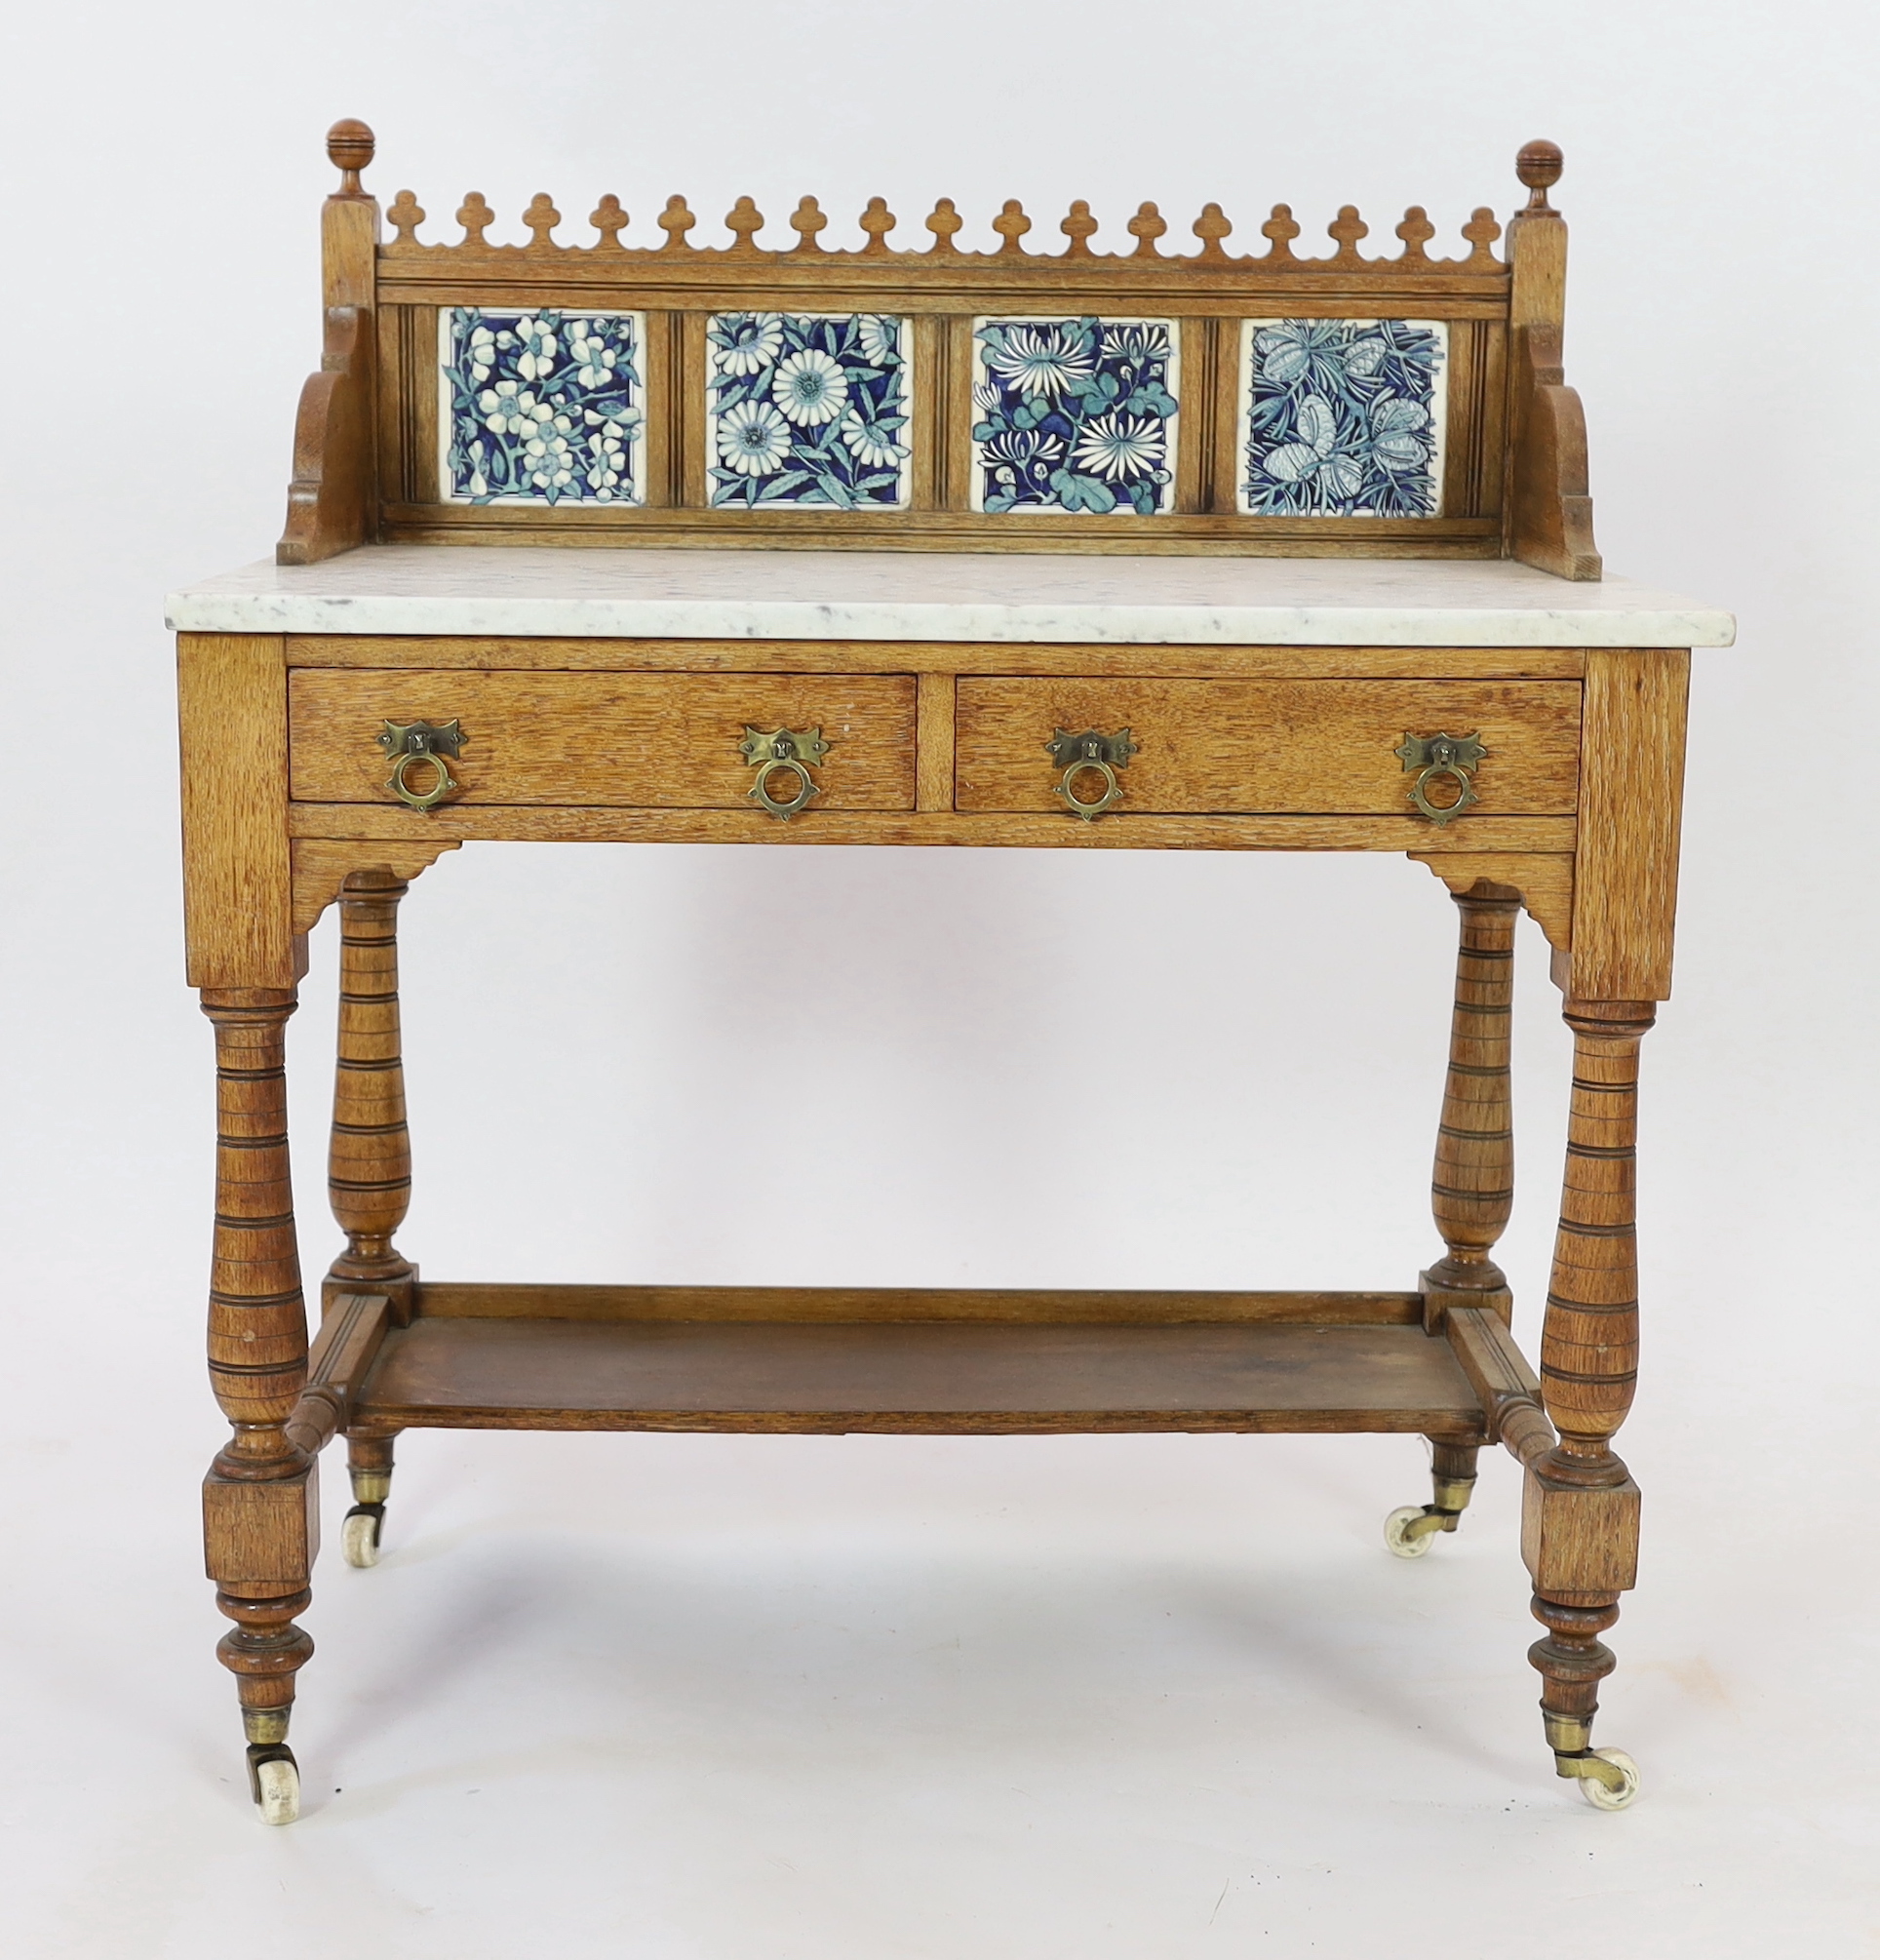 Lewis Foreman Day (1845-1910). A Victorian Aesthetic movement golden oak and marble washstand, width 90cm, depth 51.5cm, height 104cm